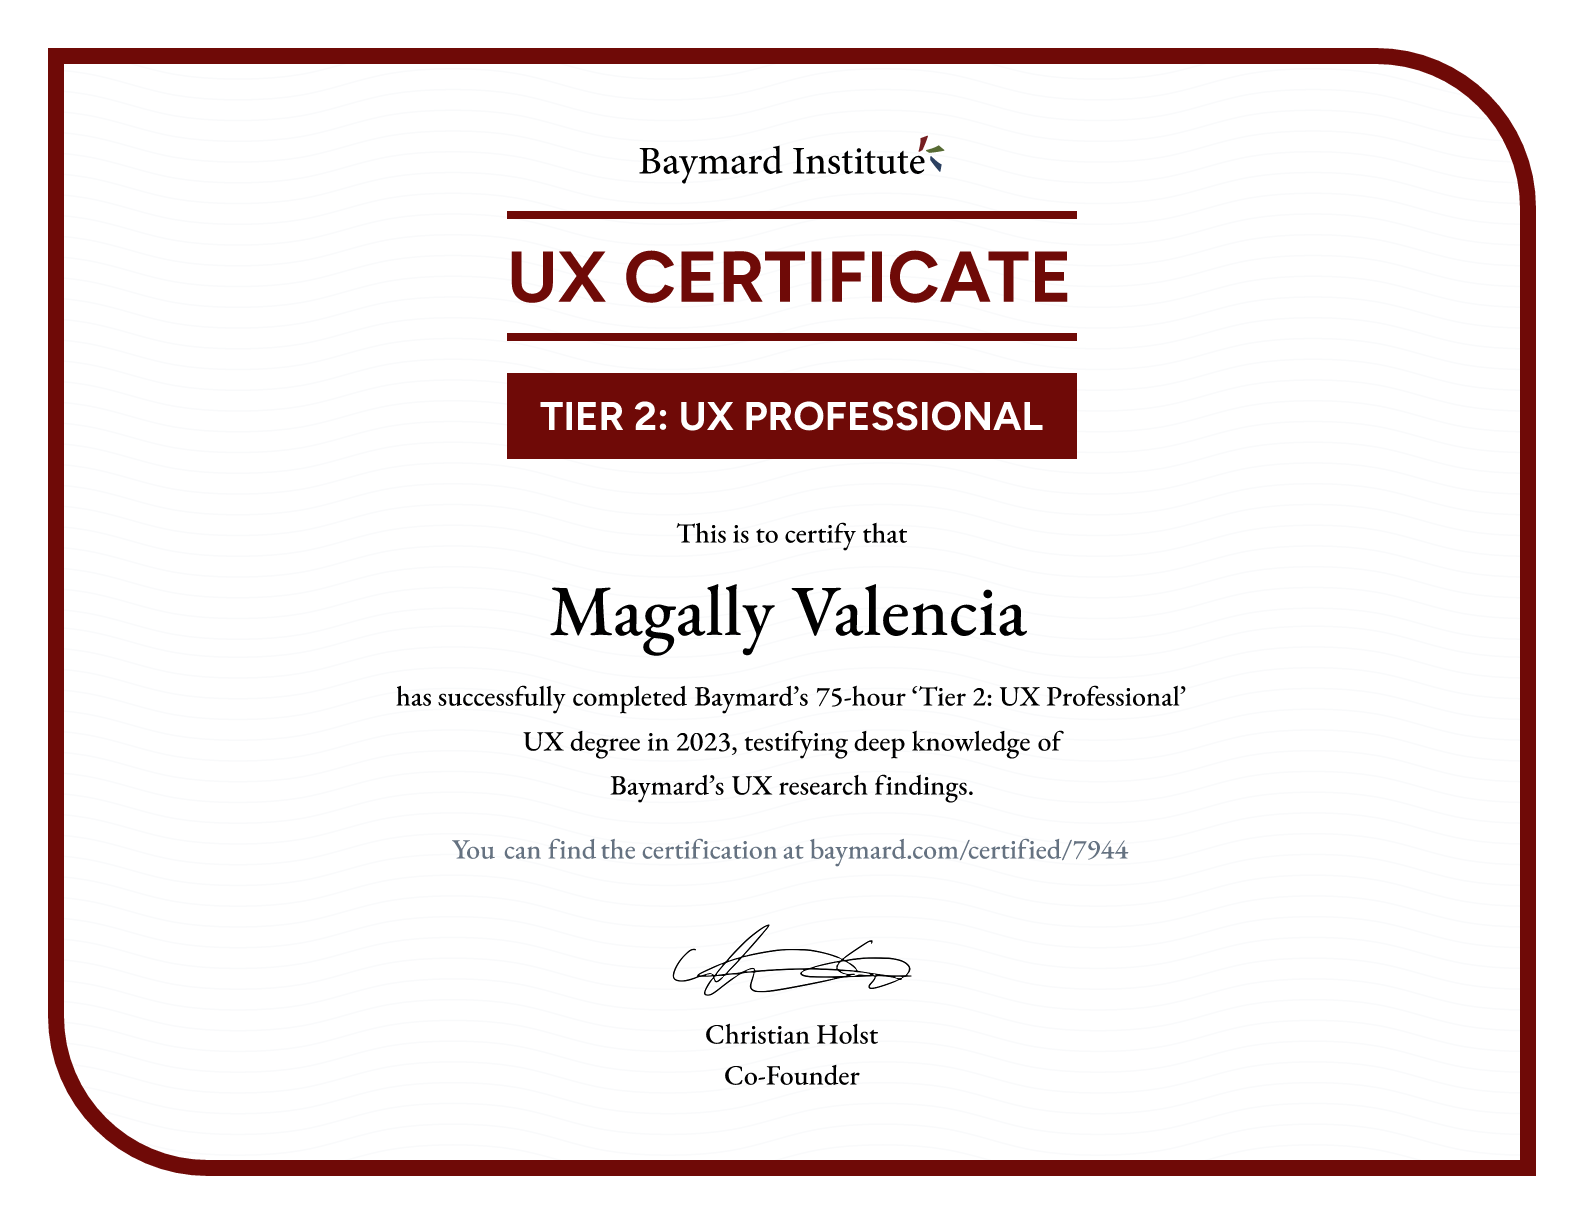 Magally Valencia’s certificate